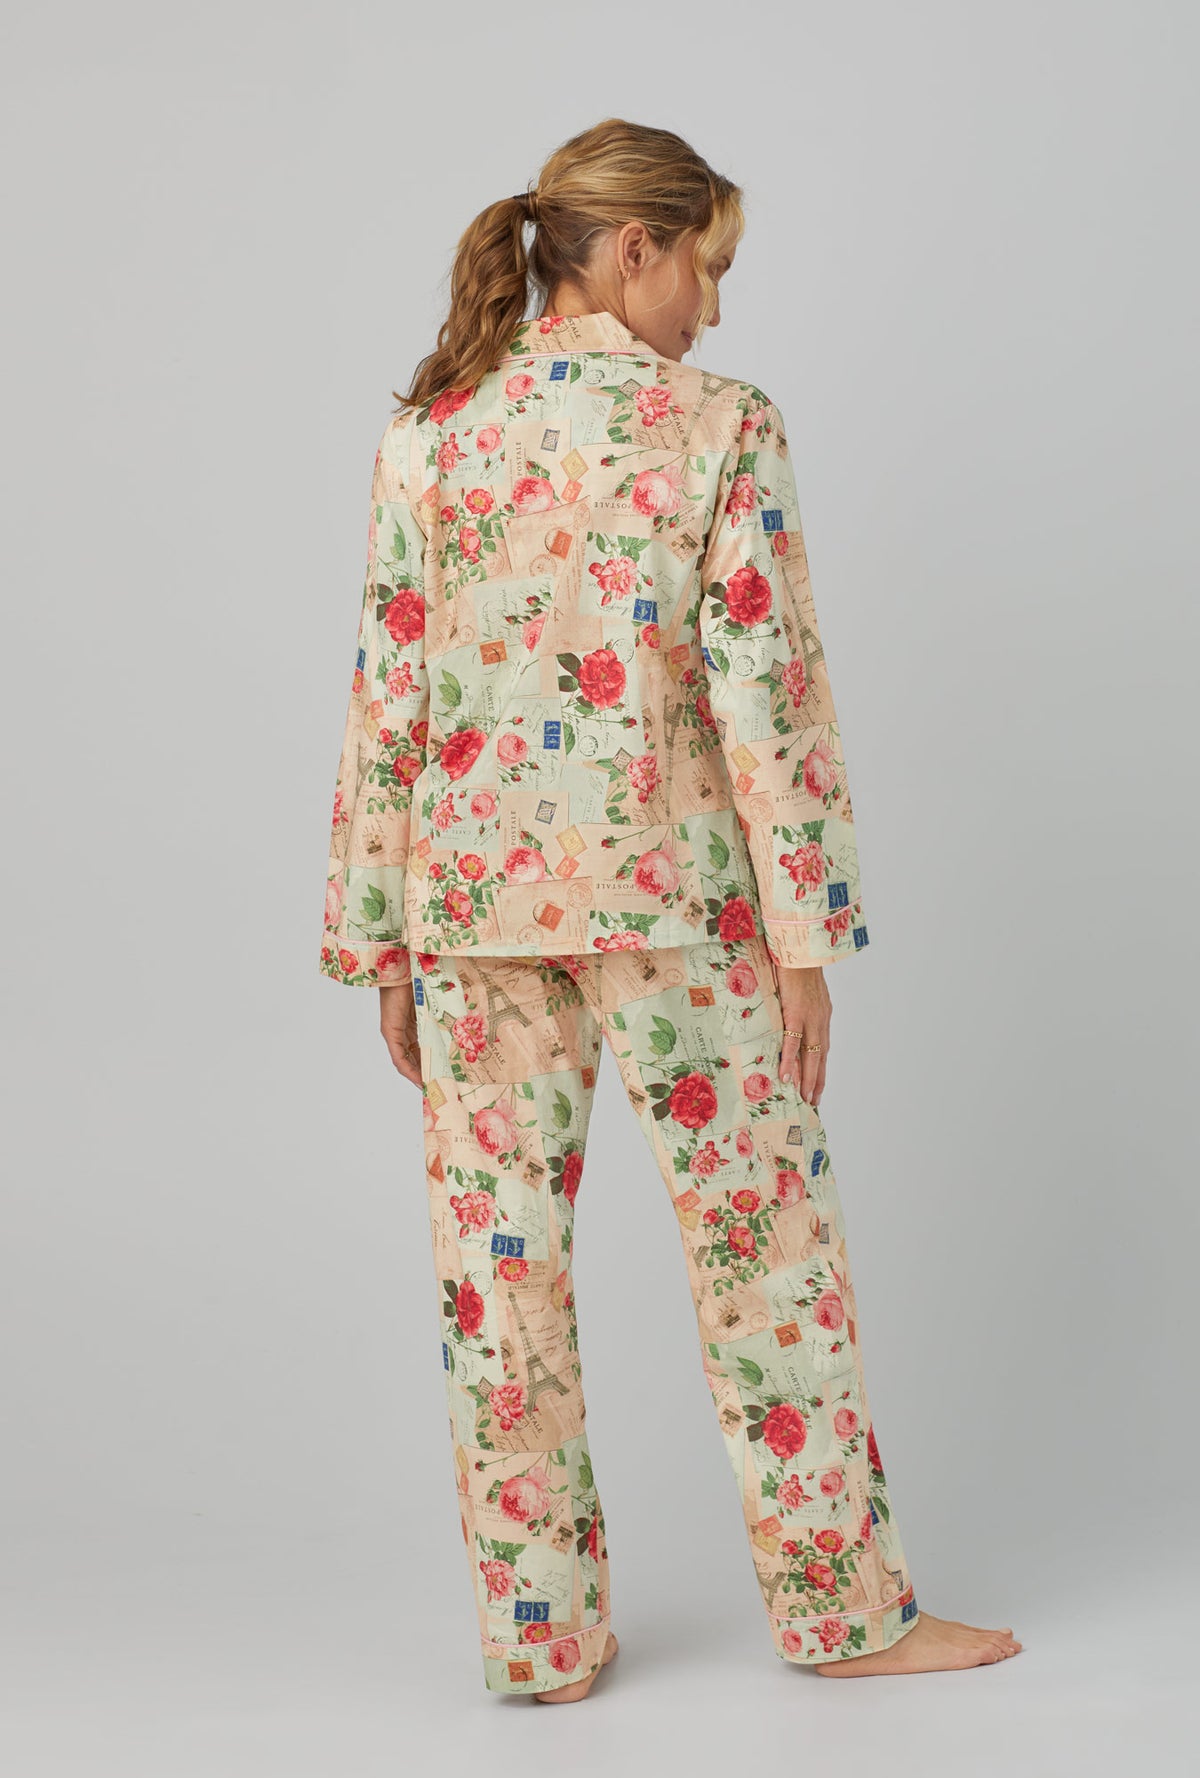 A lady wearing Long Sleeve Classic Woven Cotton Poplin PJ Set with Love Notes print